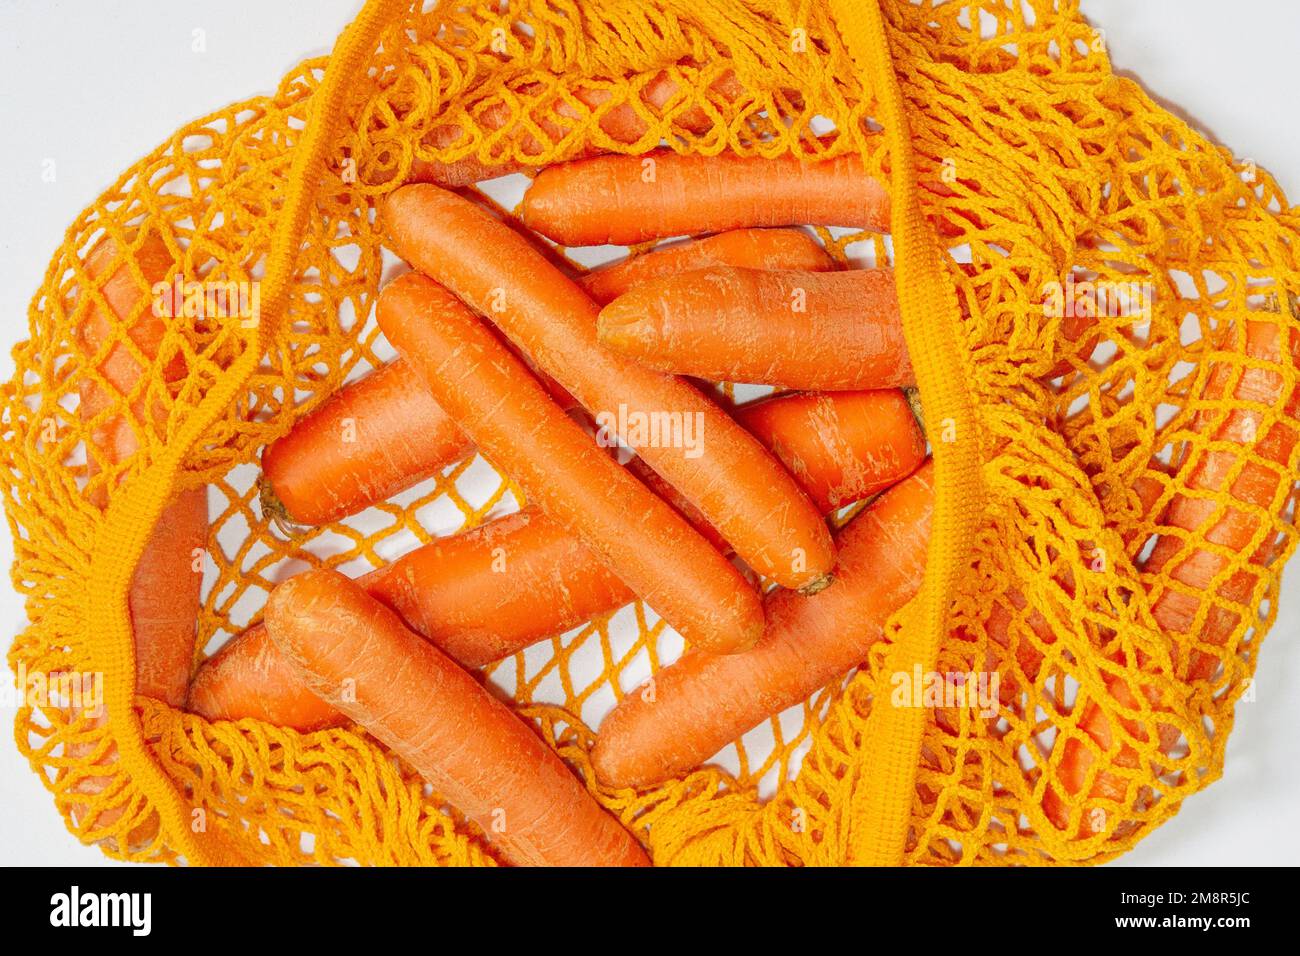 Mesh reusable bag with fresh carrots. Orange string bag. Raw carrots. View from above. Close-up. Vegetarian, raw food, fresh vegetables. Conscious con Stock Photo